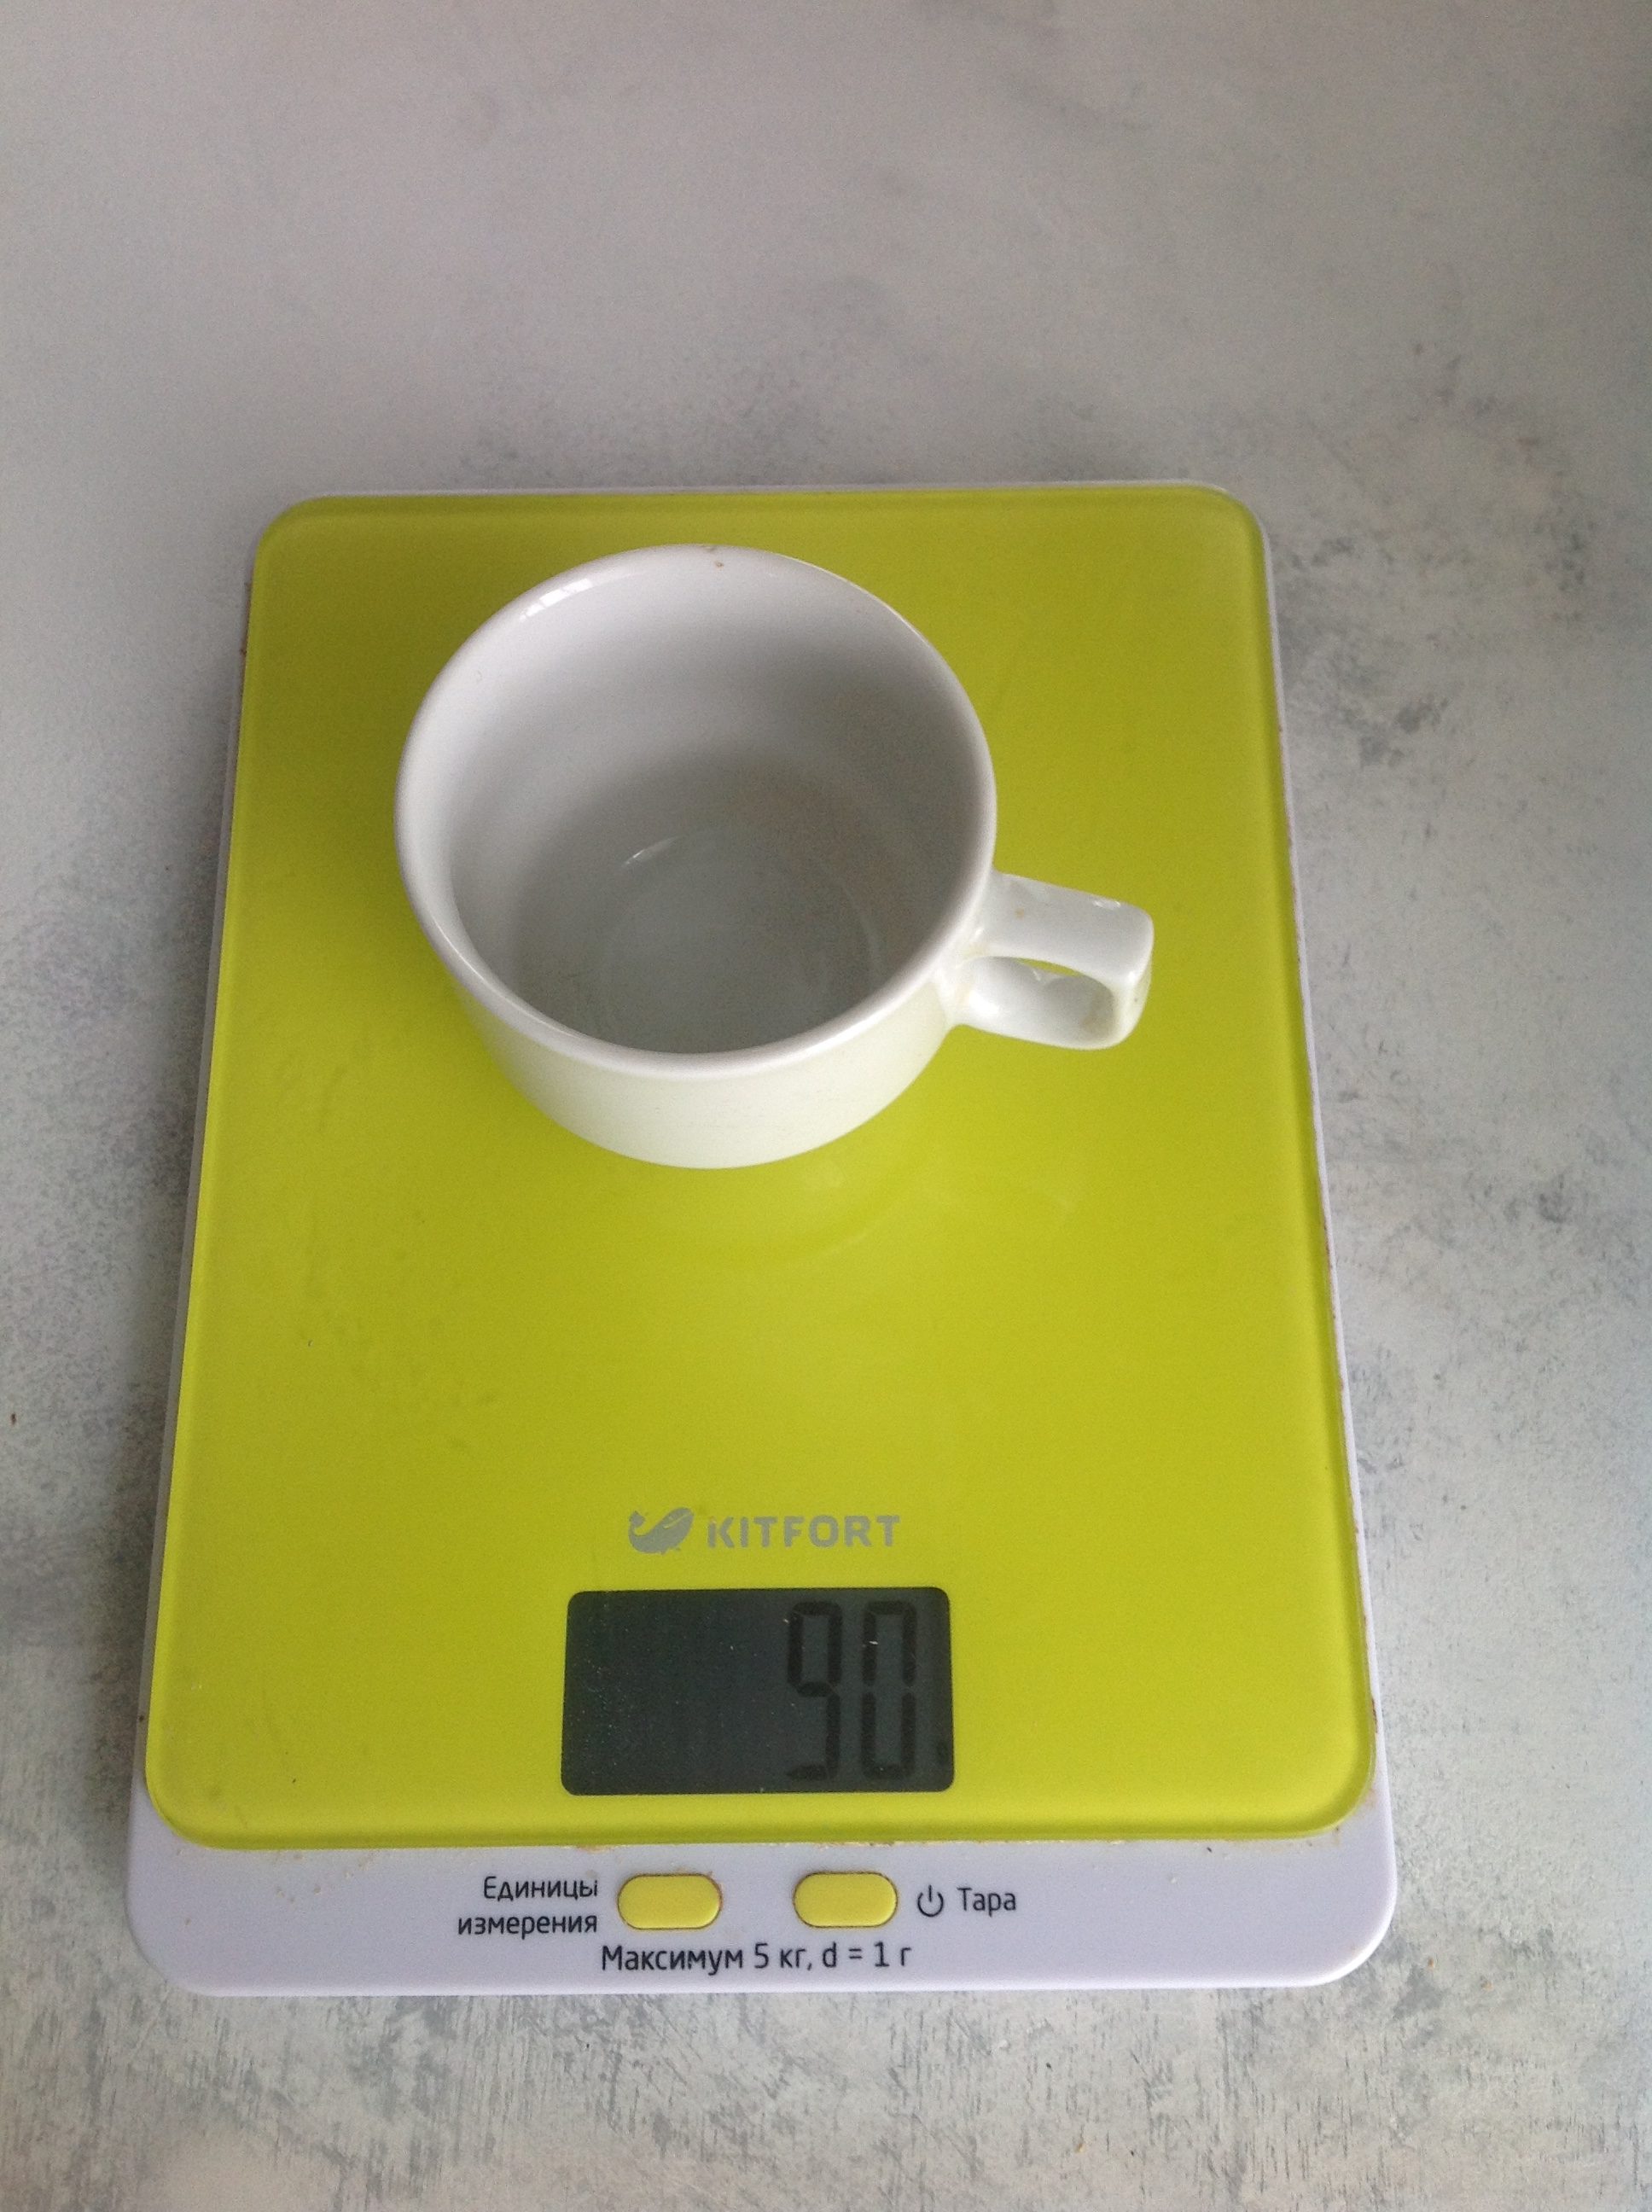 How much does a small coffee mug weigh?